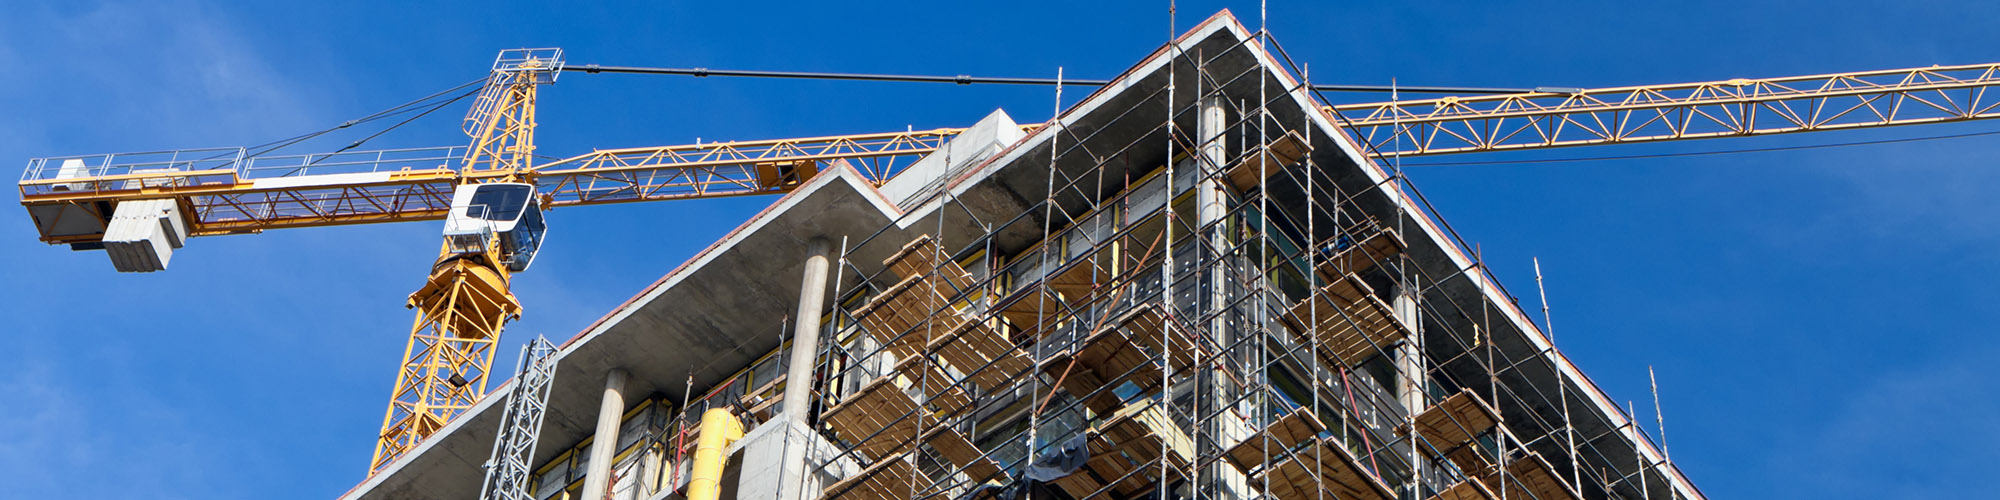 Construction Management Services in Irvine, CA